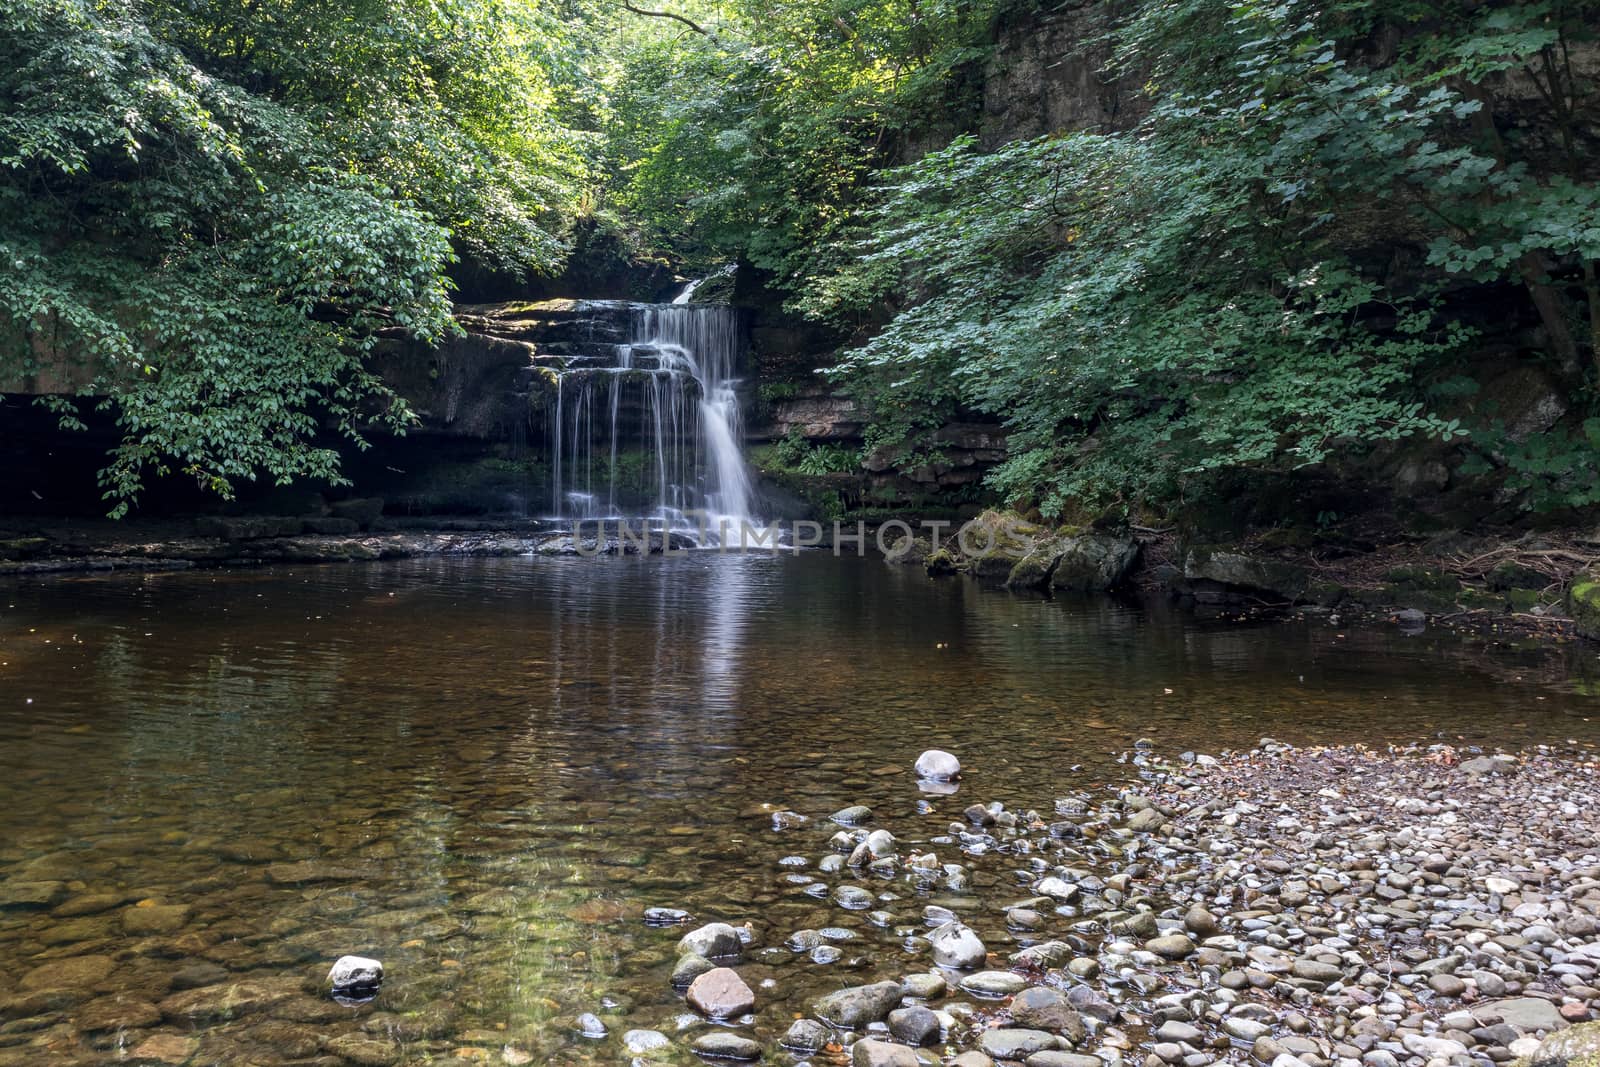 View of Cauldron Force at West Burton in The Yorkshire Dales Nat by phil_bird